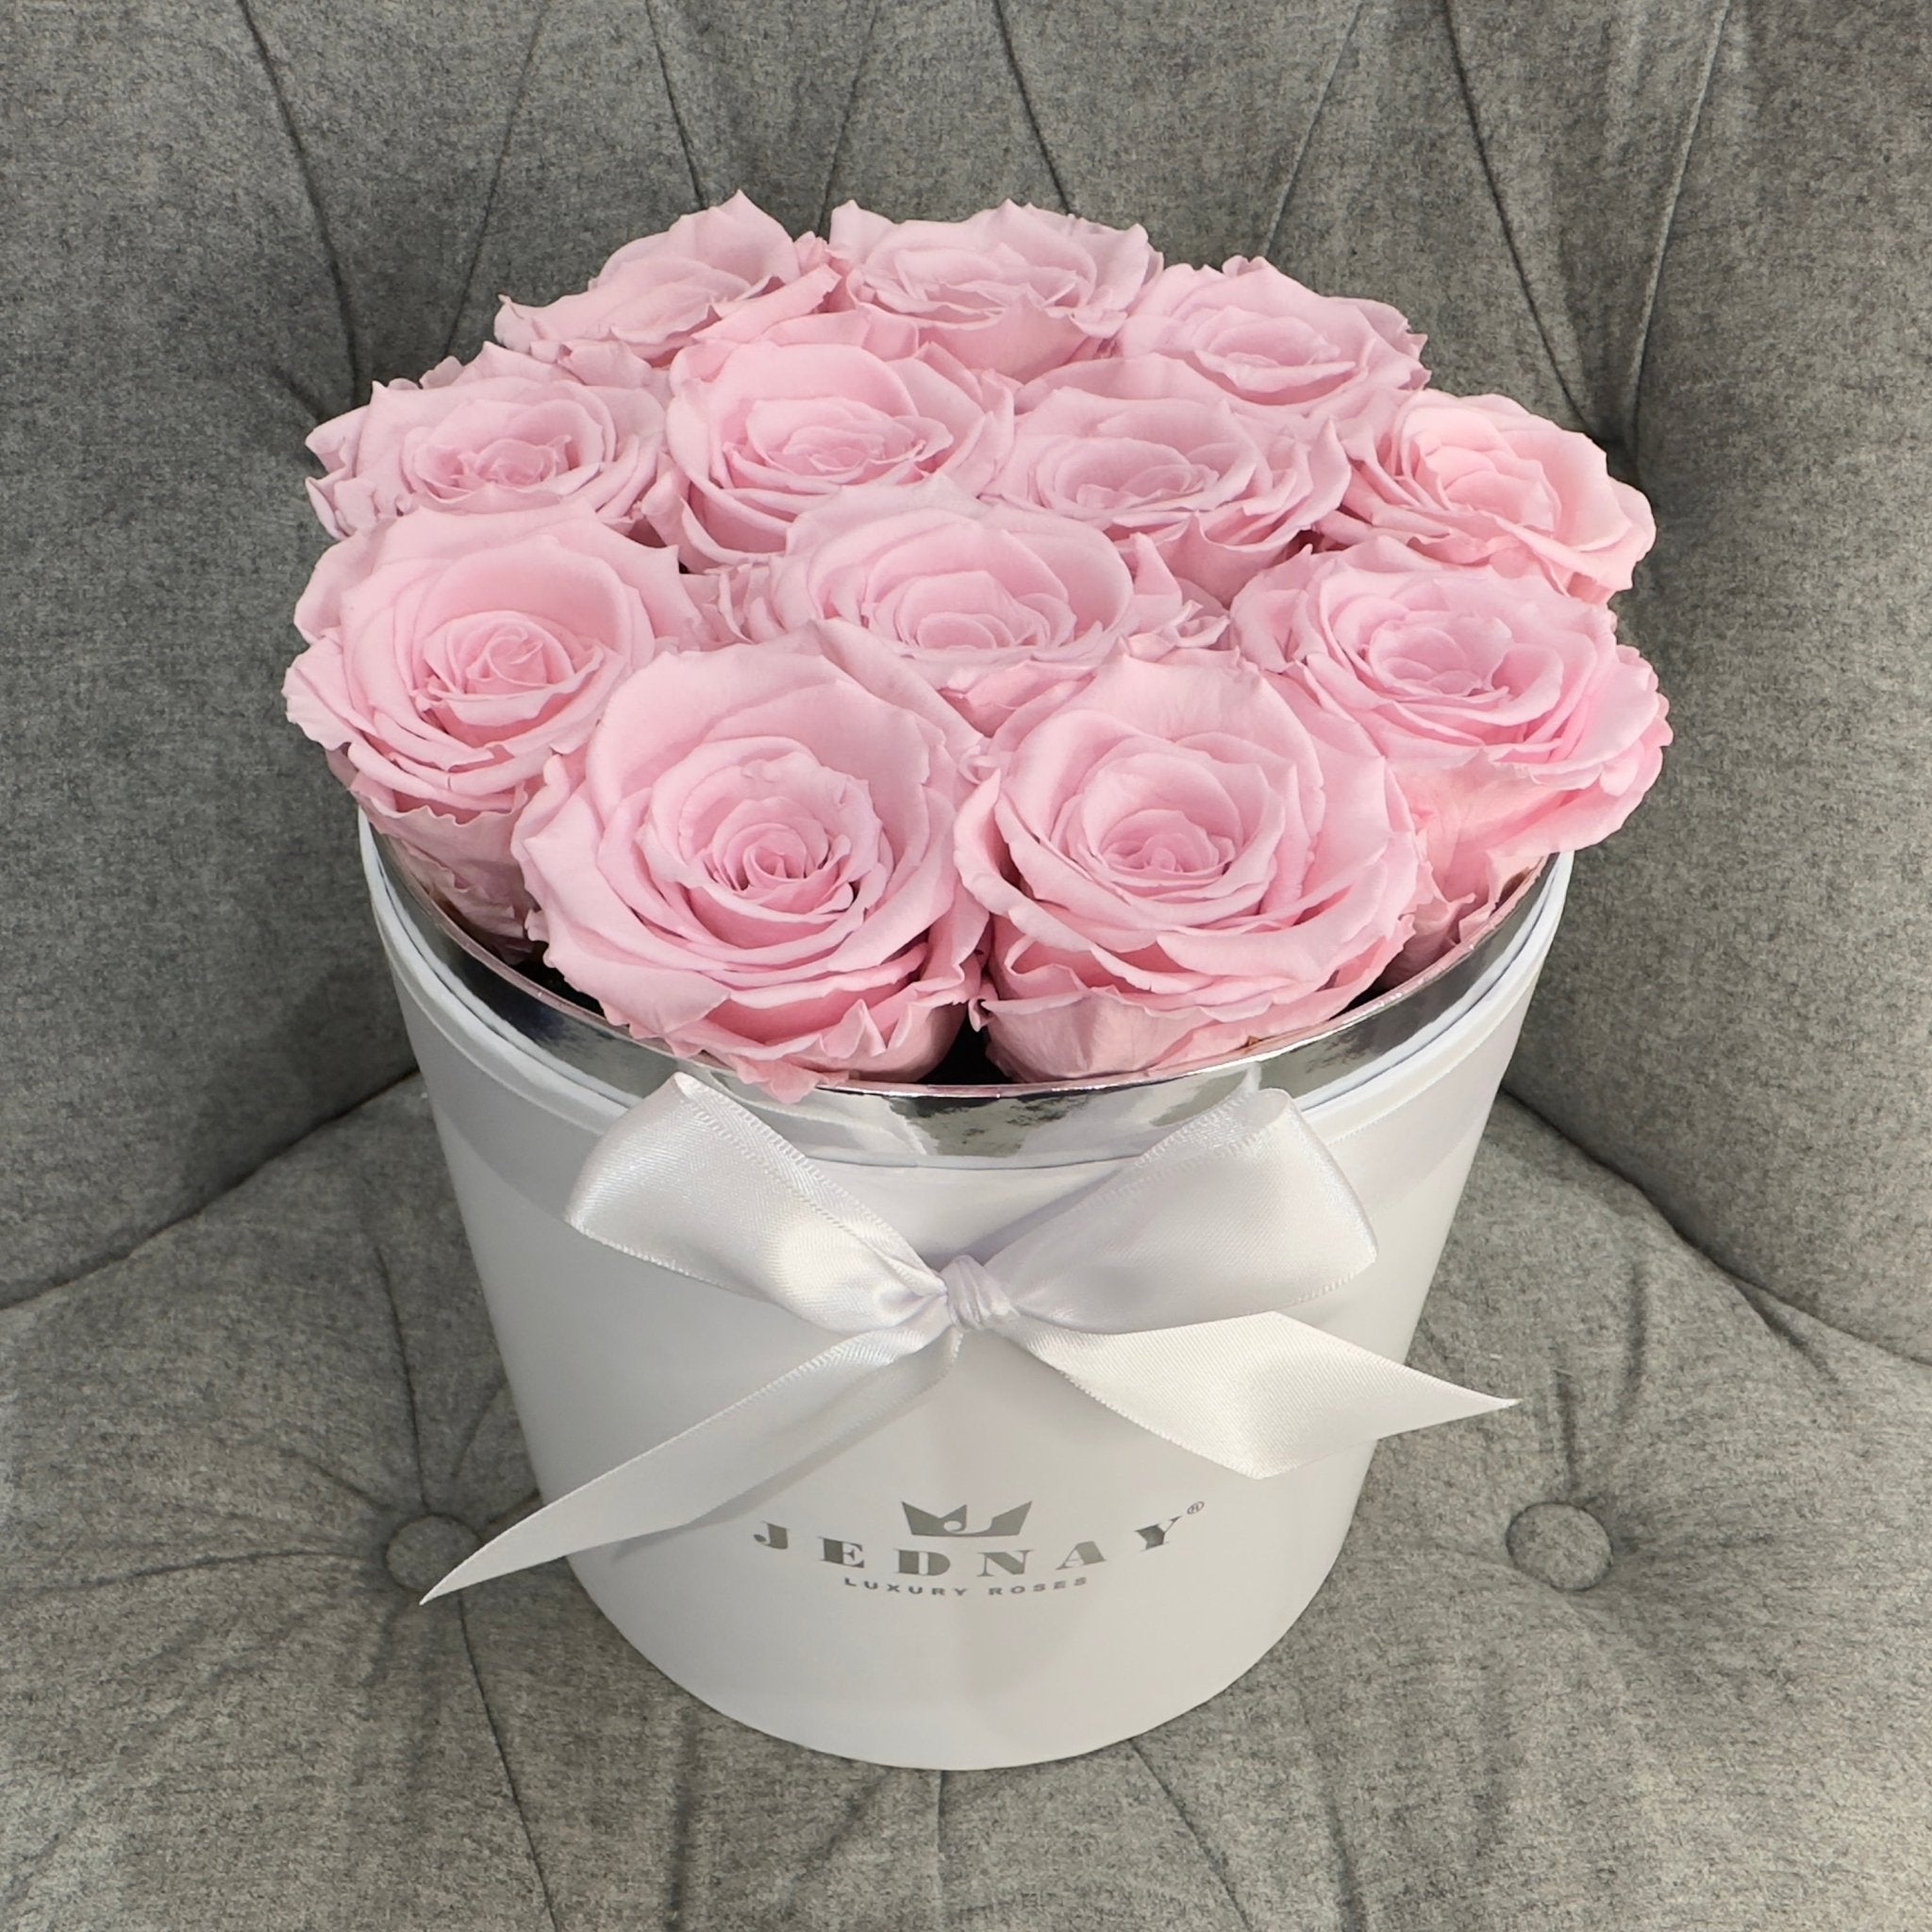 Large Classic White Forever Rose Box - Soft Pink Eternal Roses - Jednay Roses